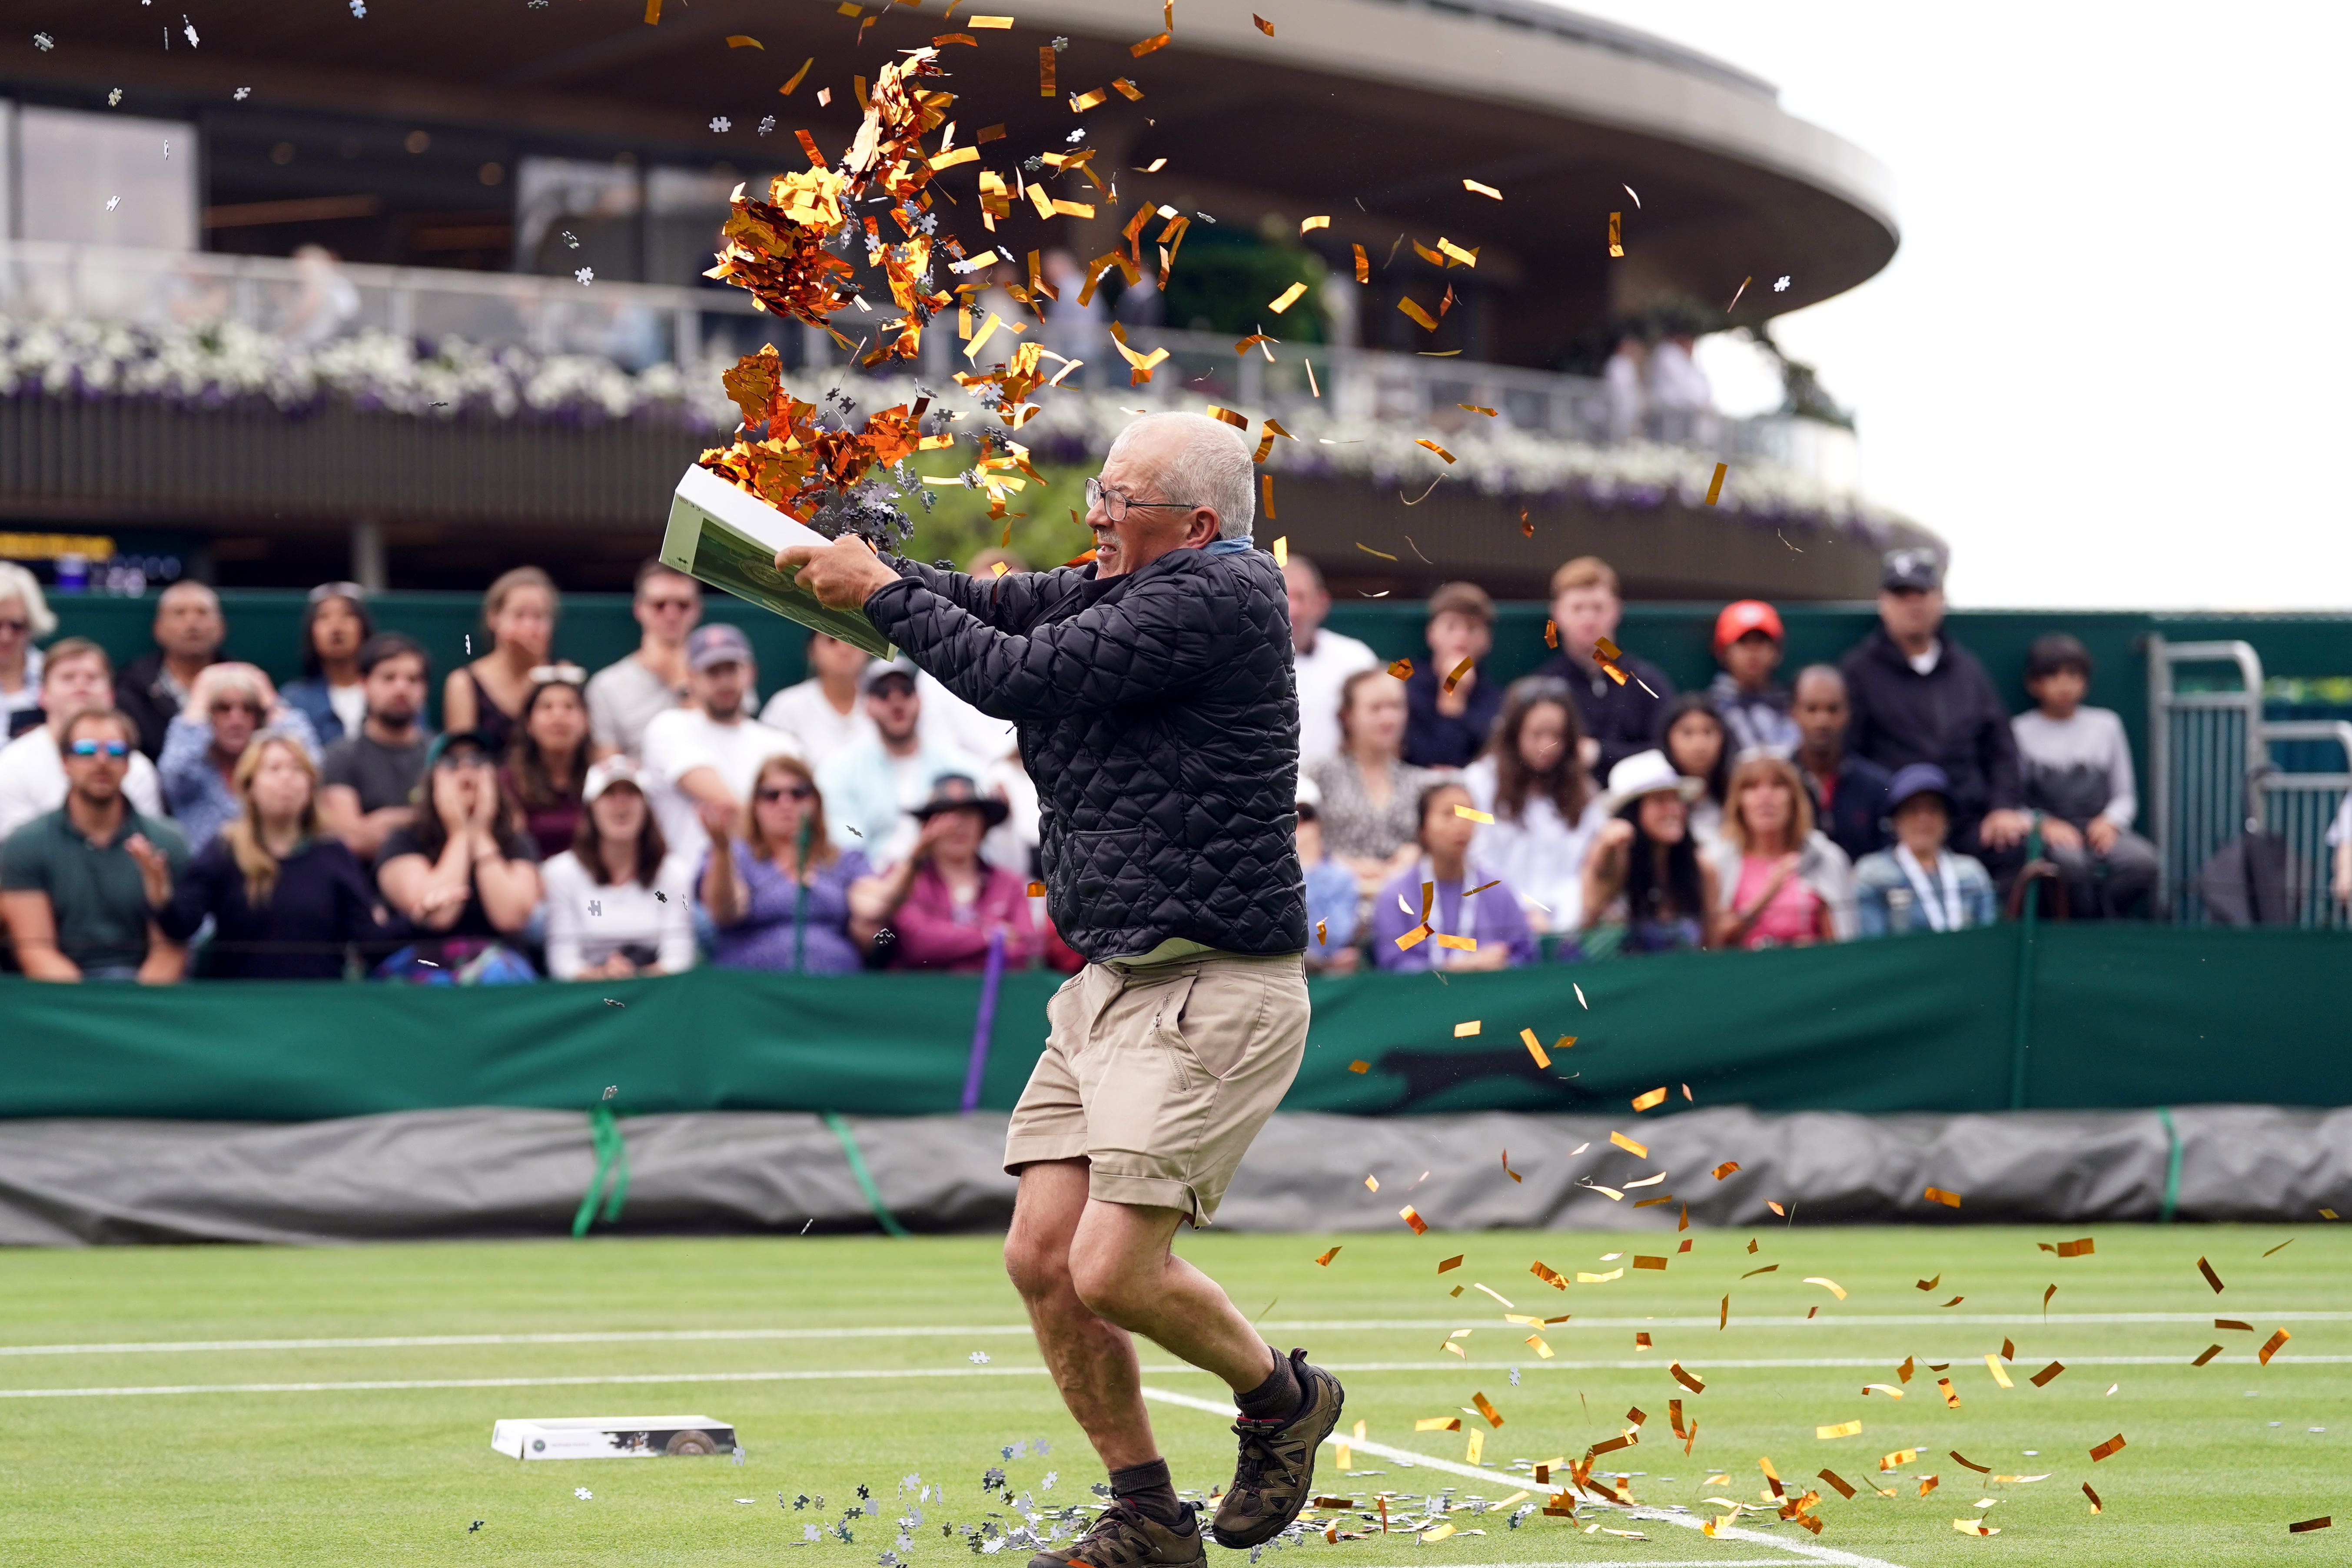 A Just Stop Oil protester interrupts match play at Wimbledon